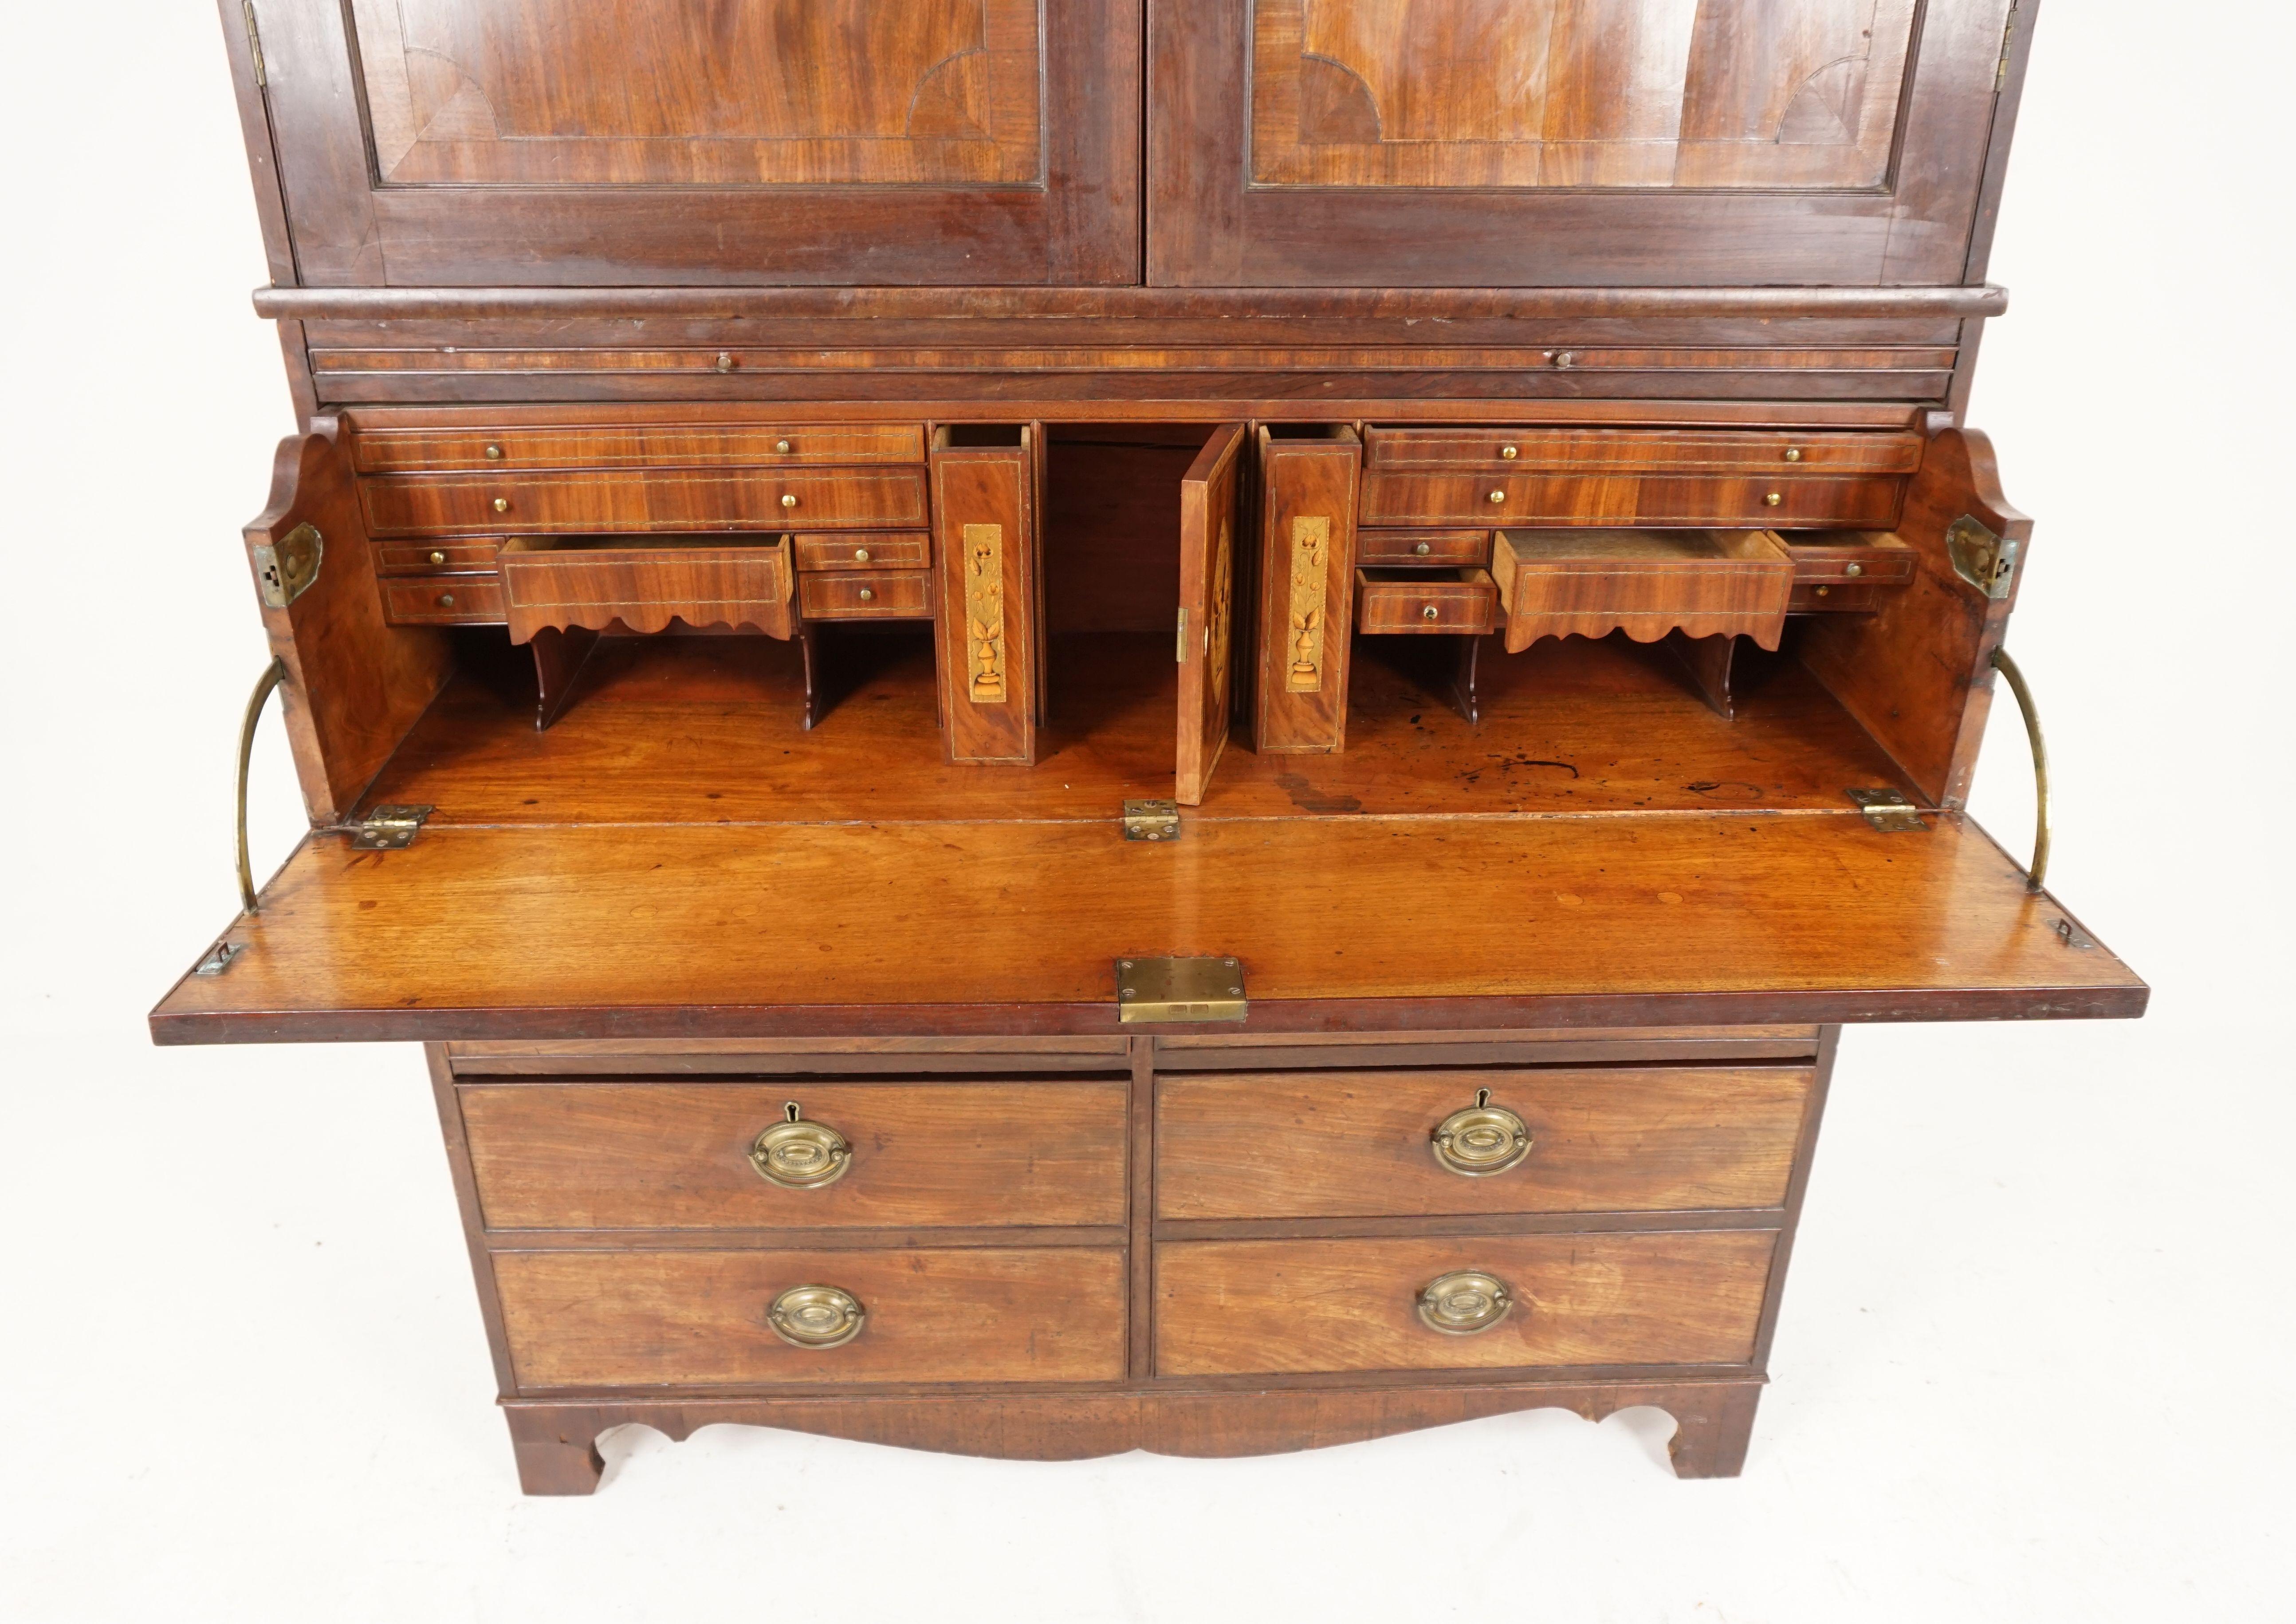 Antique Georgian Mahogany housekeeper secretaire cupboard, Scotland 1780, H071

Scotland 1780
Original Finish
Moulded cornice with bands of fluting to the frieze
Two paneled doors open to reveal two full size shelves
The secretaire below has a